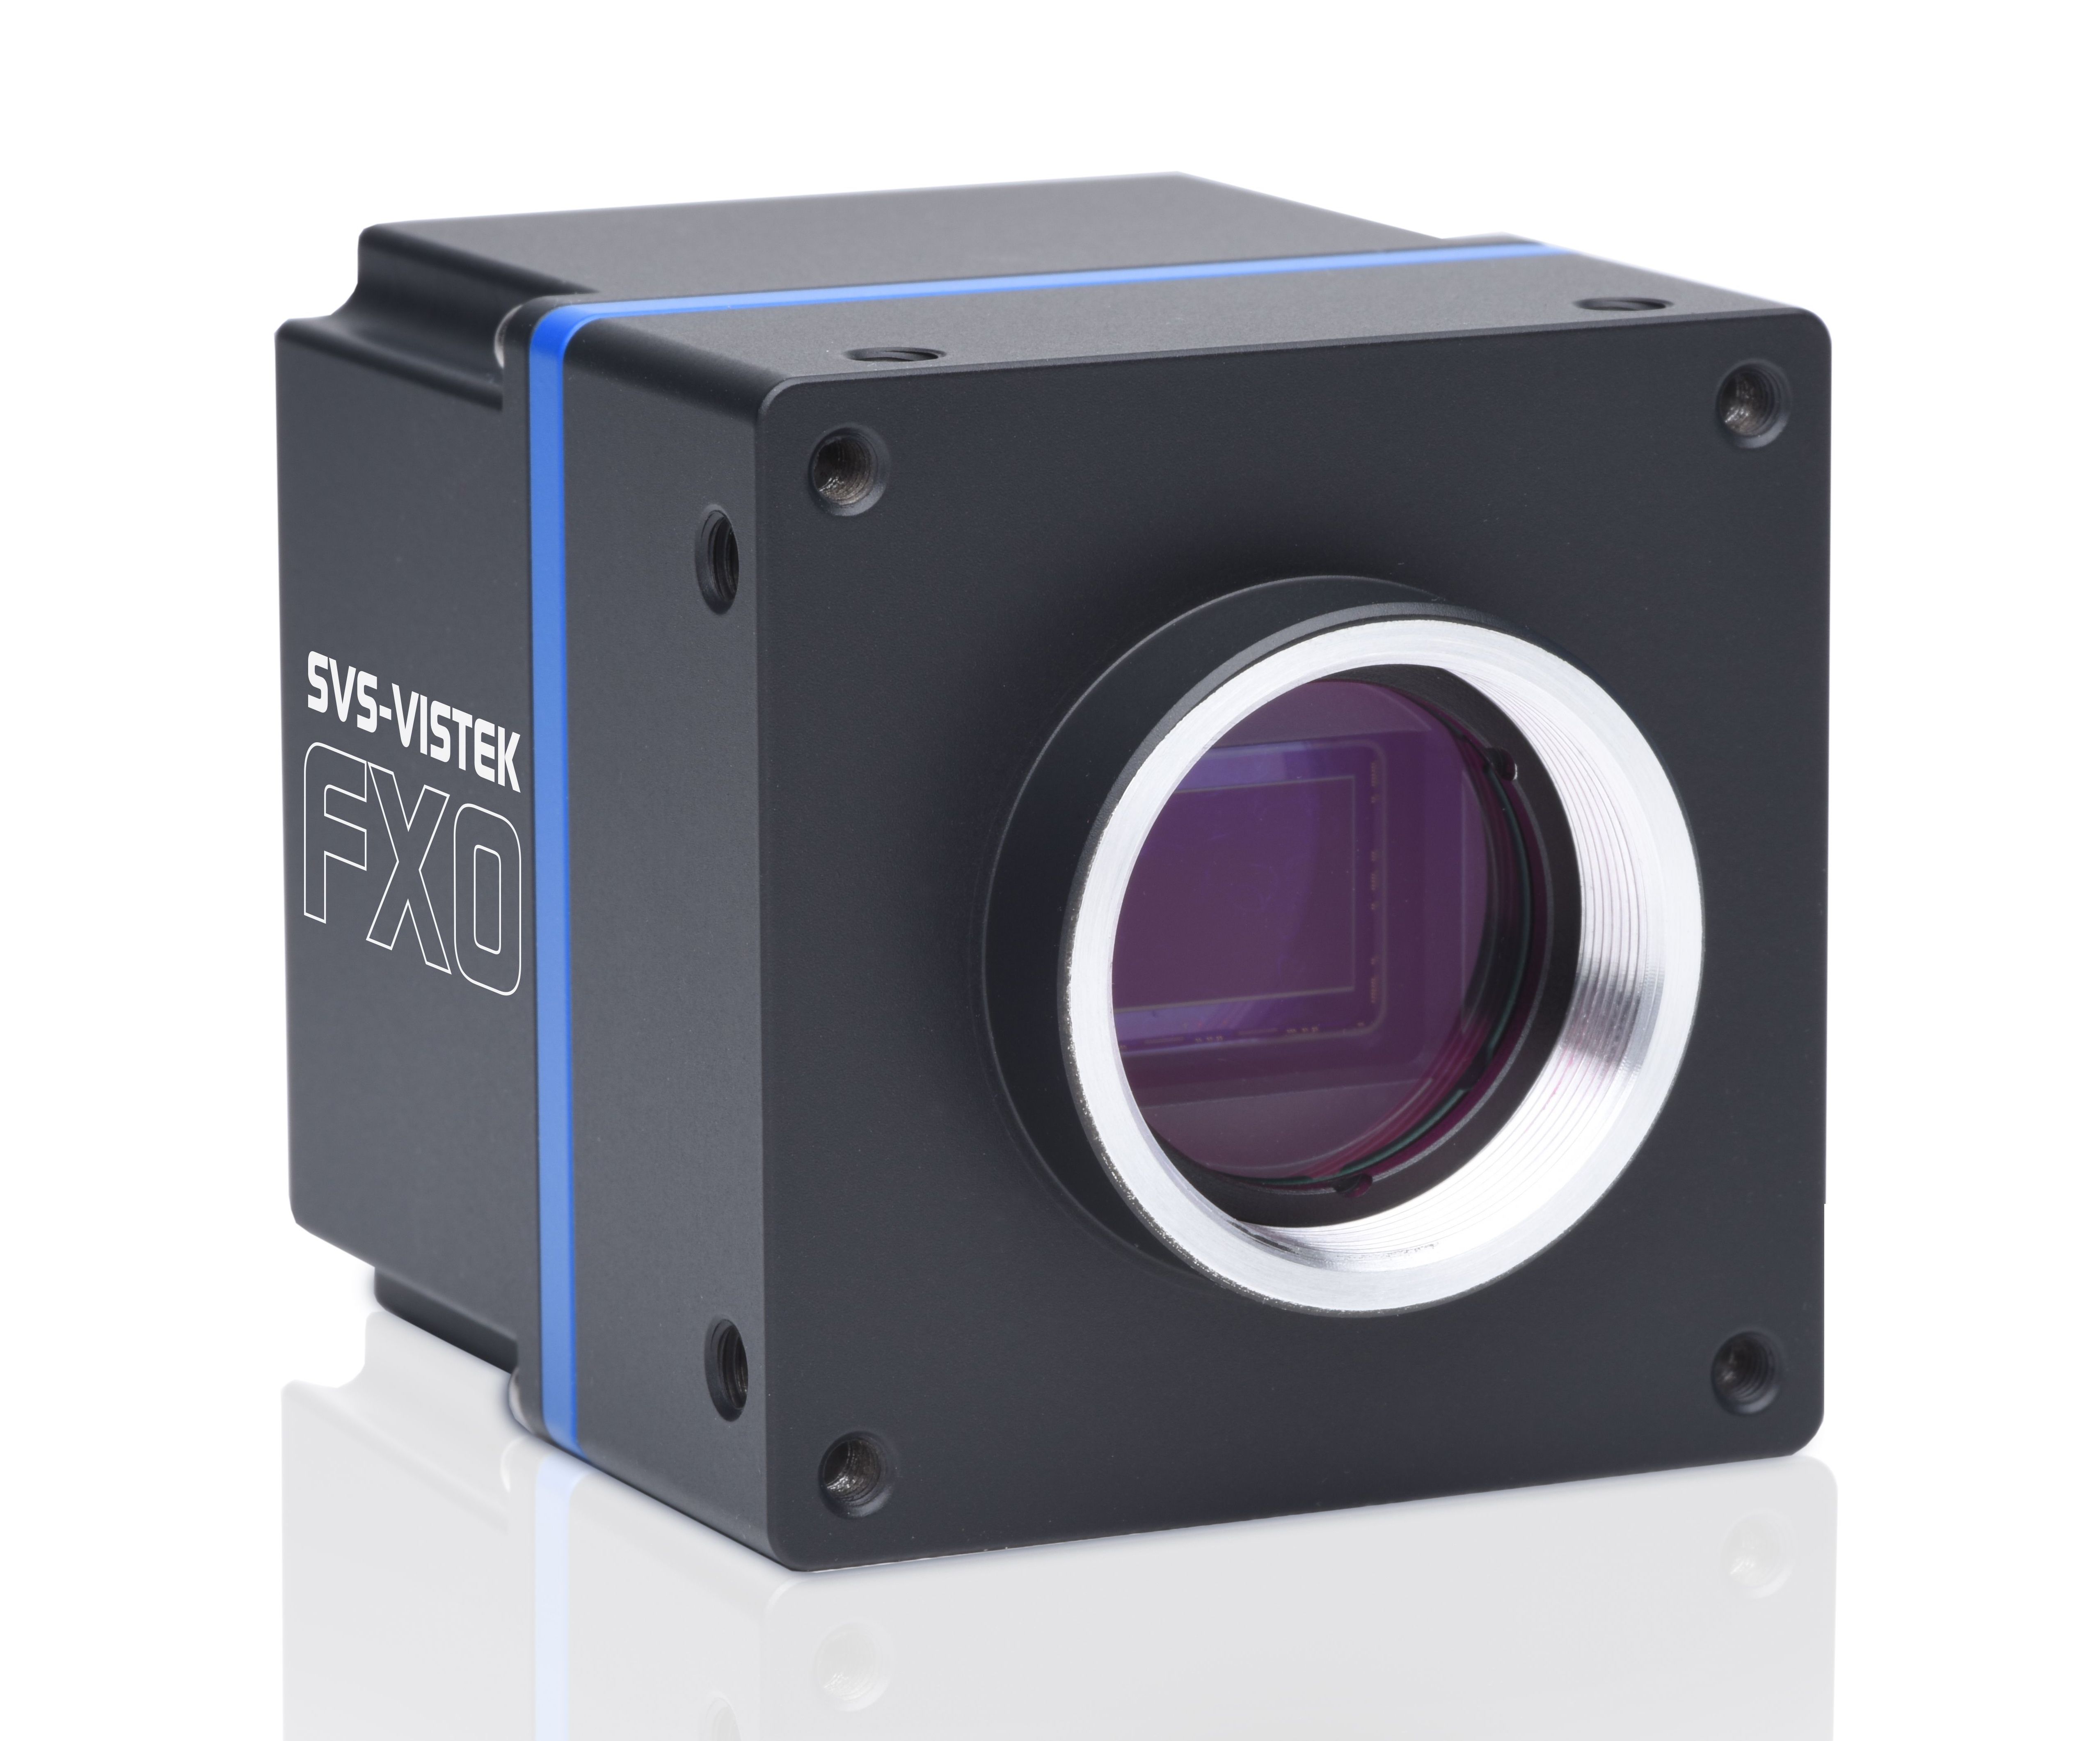 SVS-Vistek Launches the World's Fastest High-Resolution SWIR Cameras for Industrial Imaging